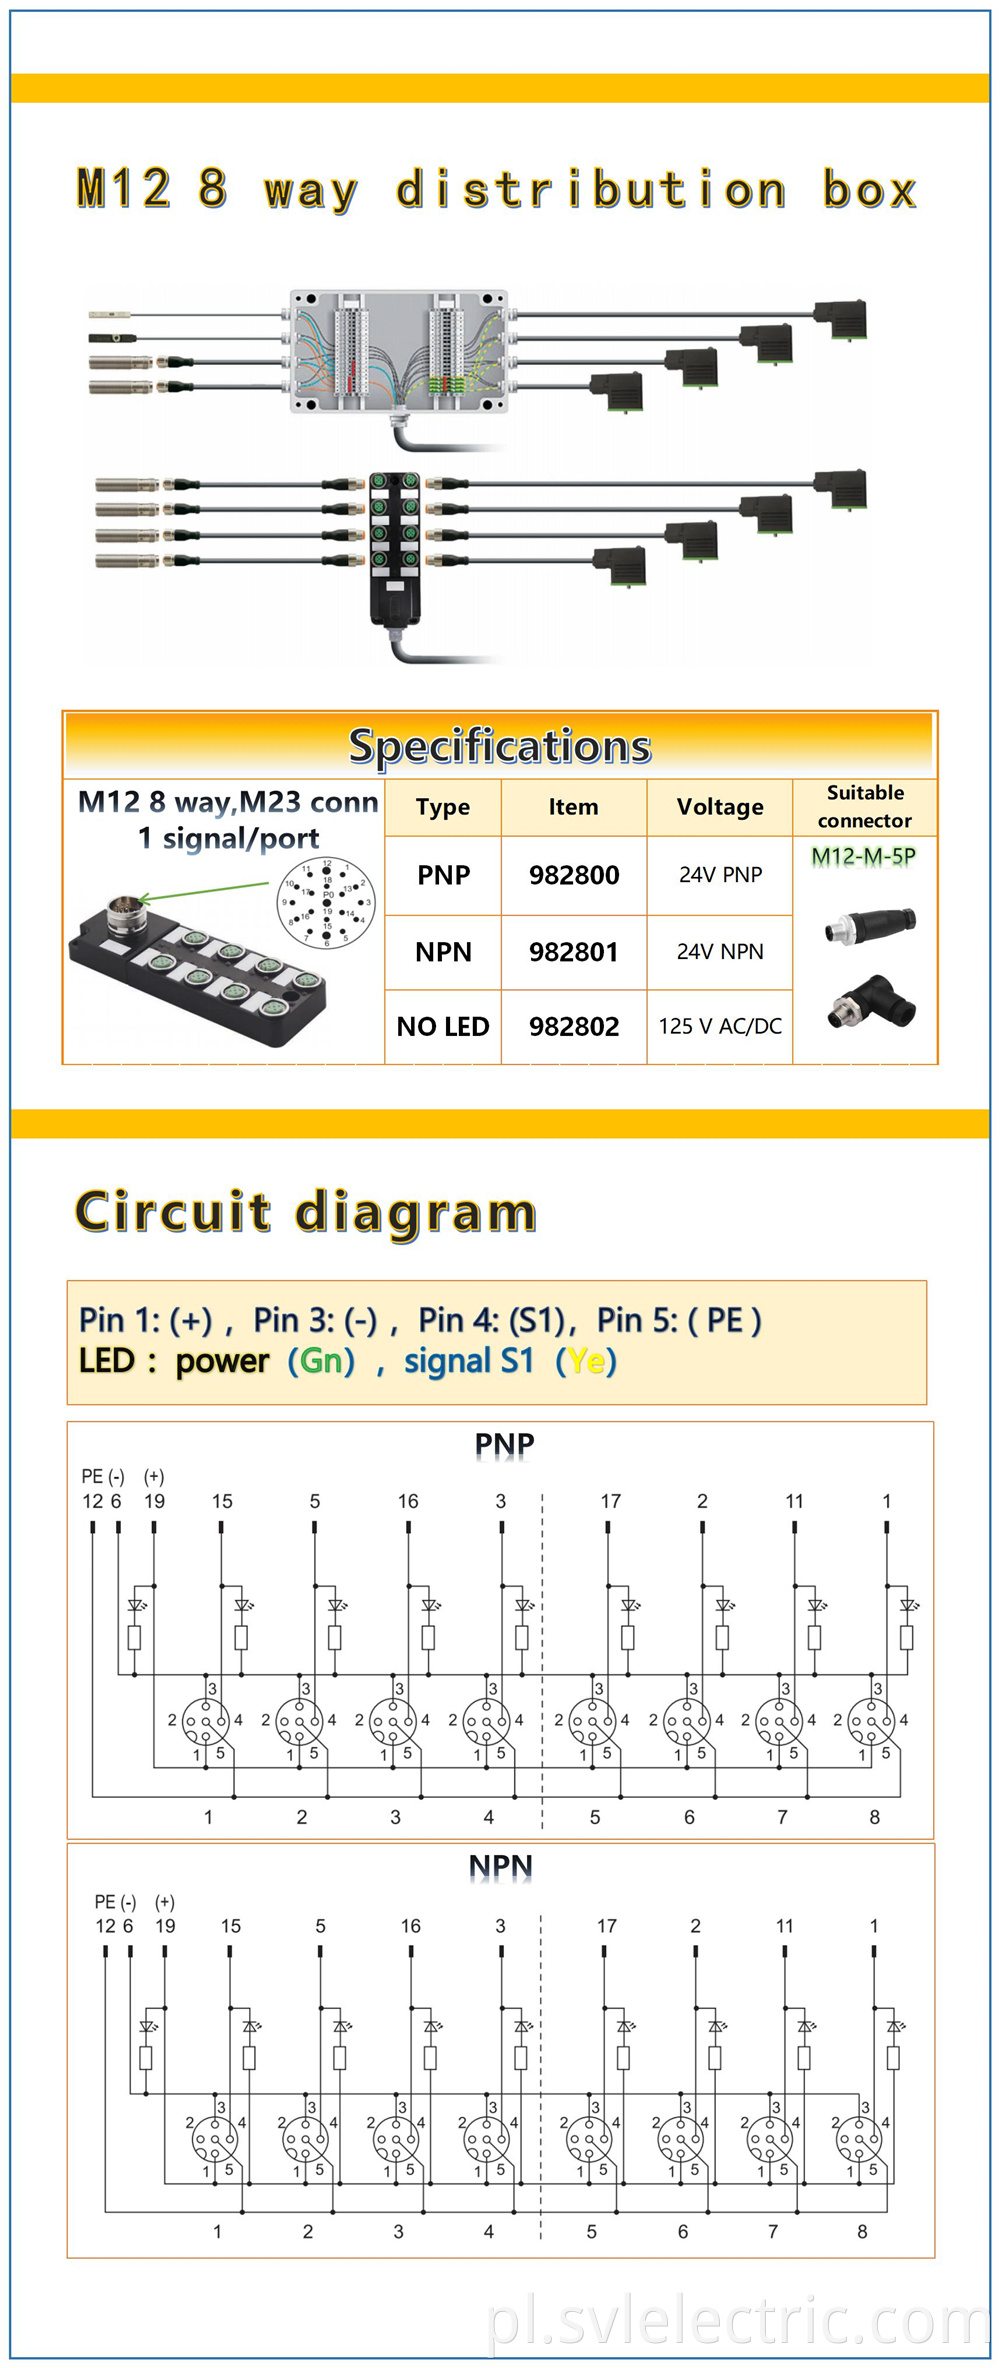 M12 8 way distribution box specifications